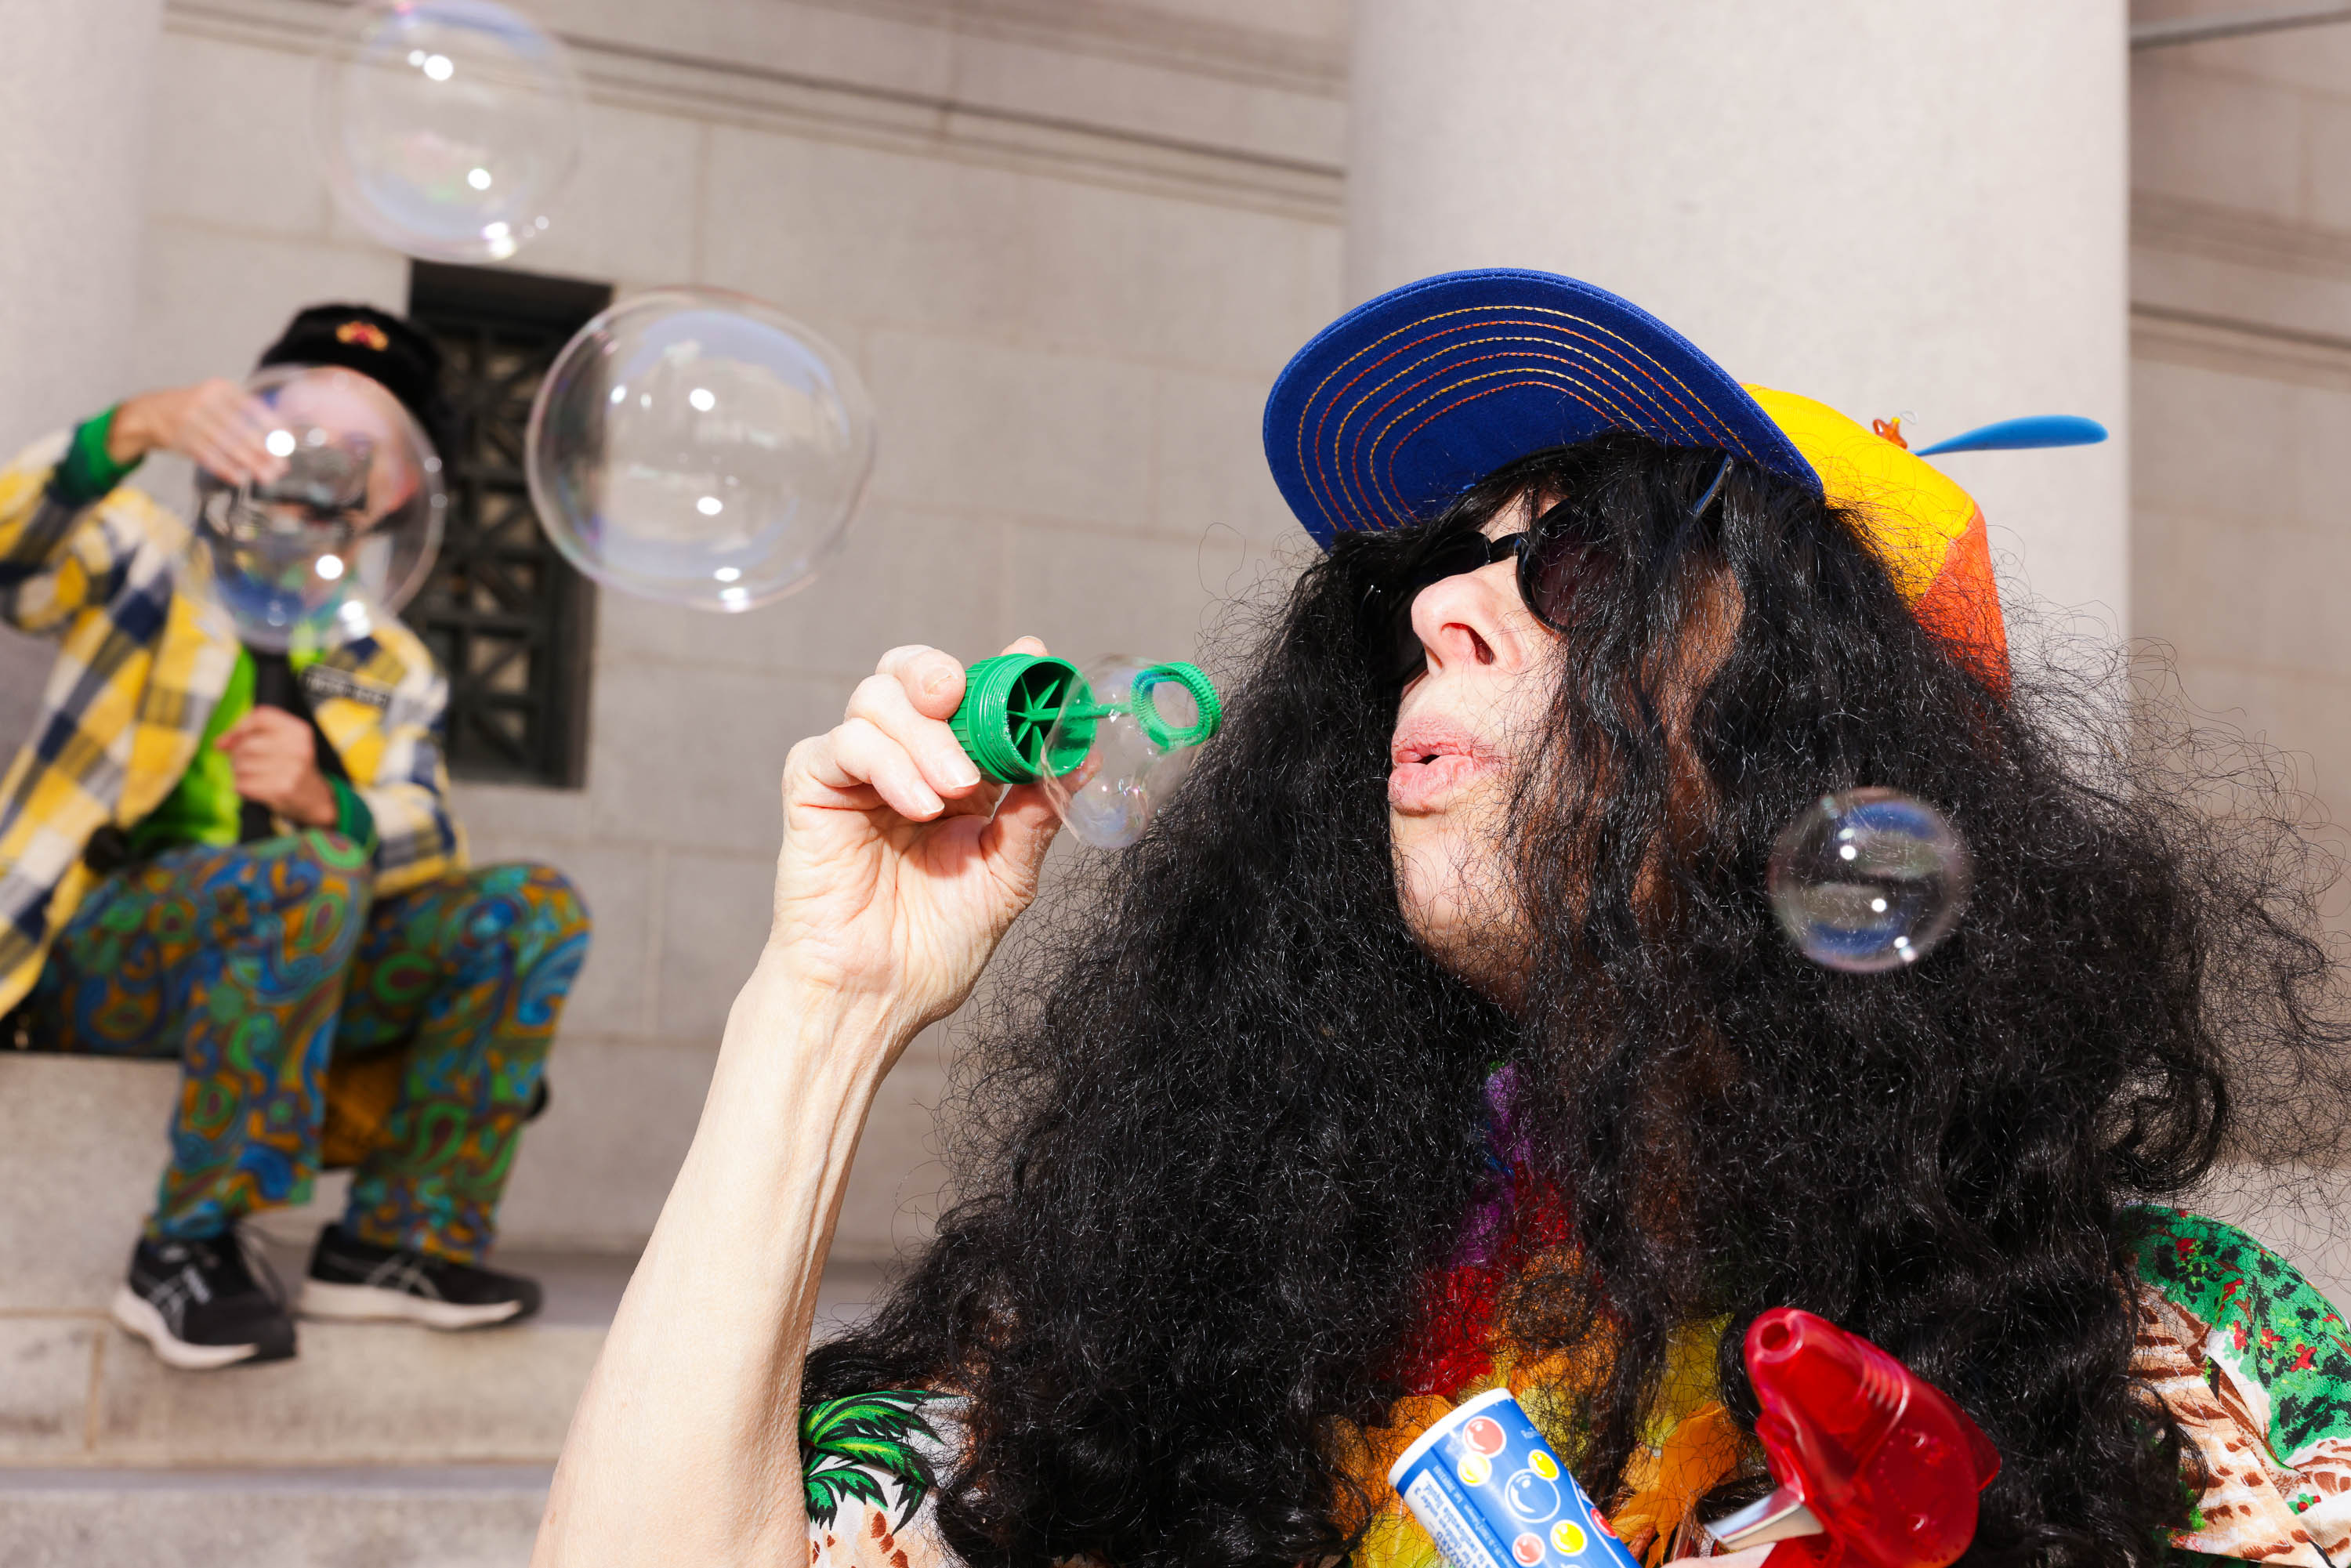 Two people in colorful costumes blow bubbles; one in foreground is wearing sunglasses and a multicolored cap.